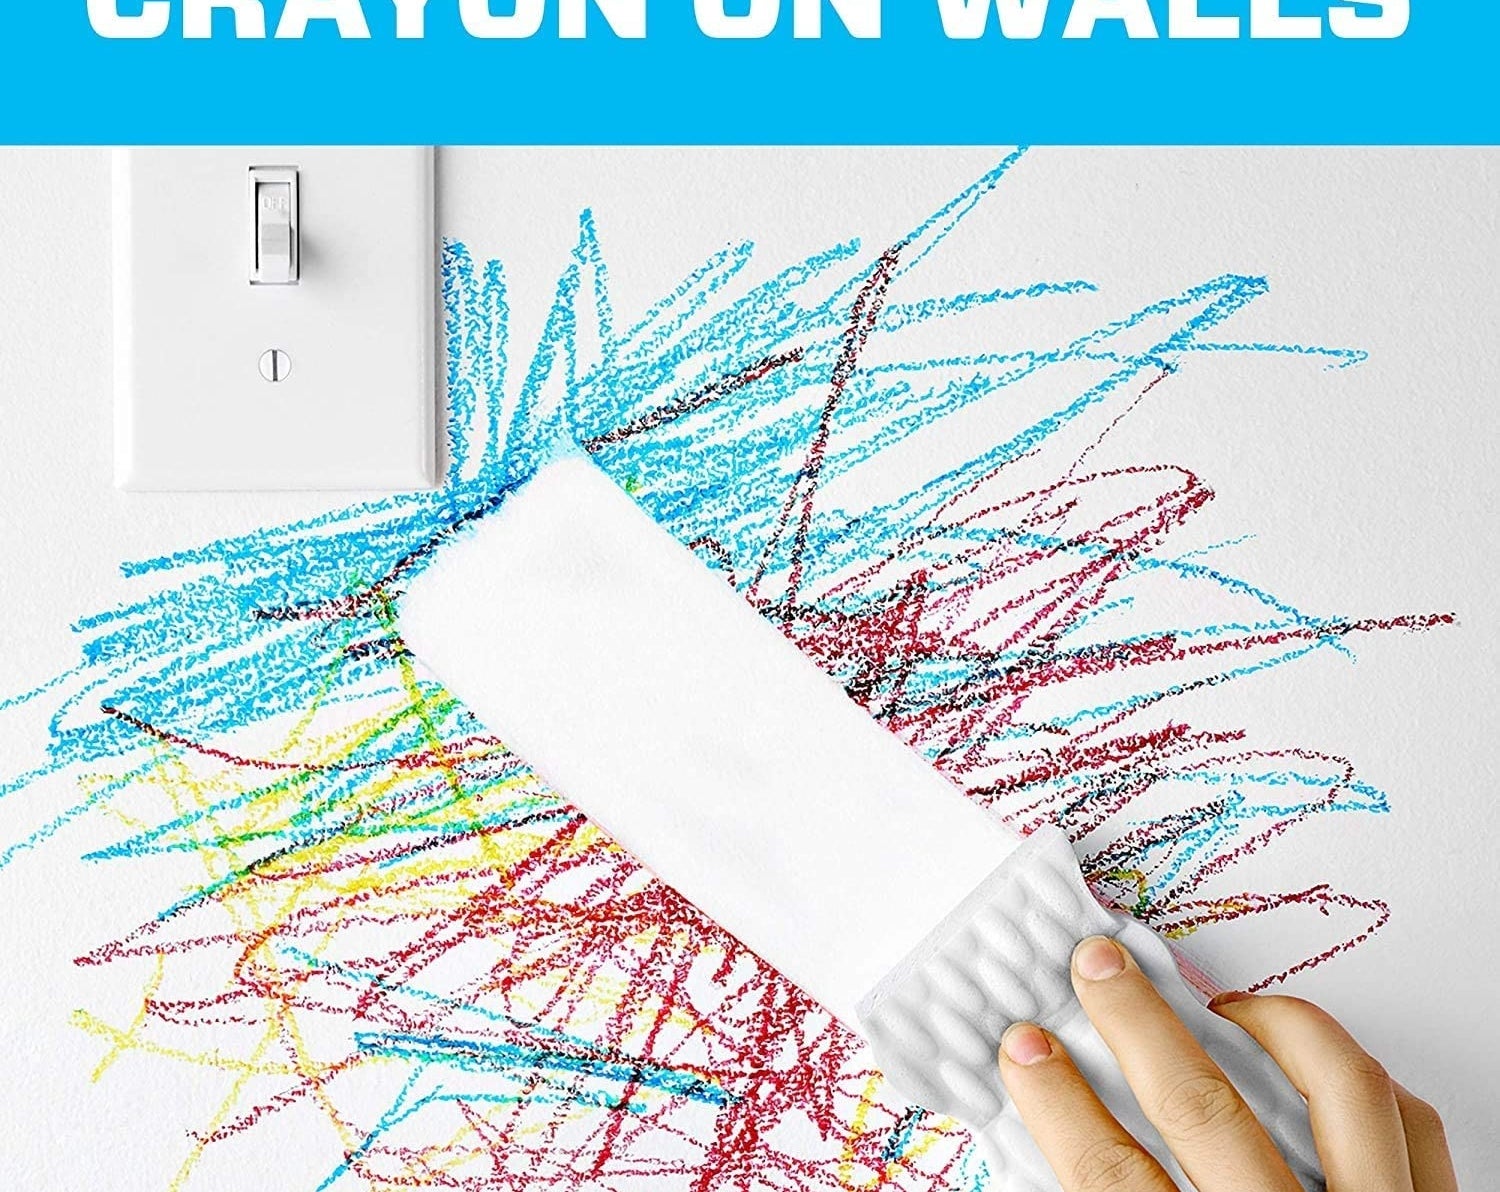 Someone using the sponge to erase crayon on a wall